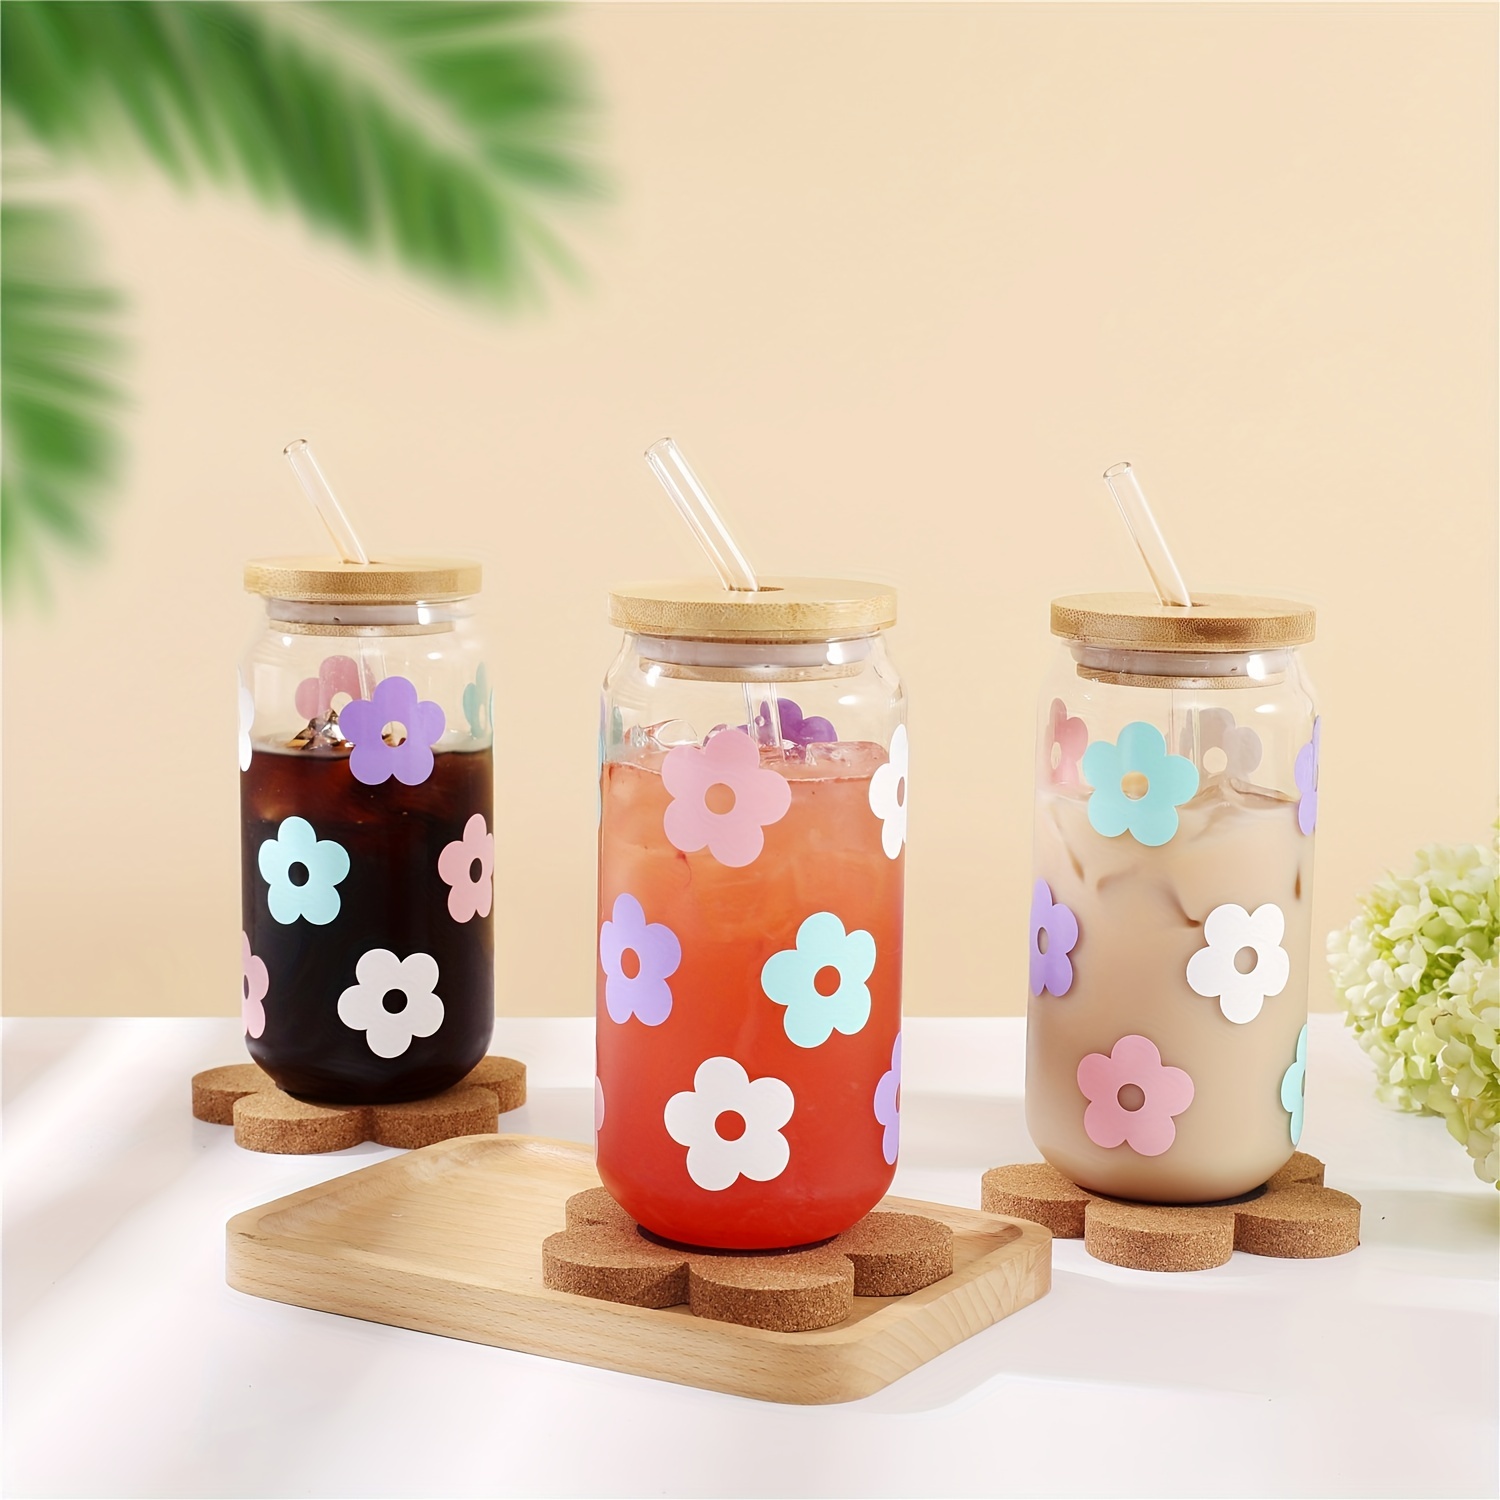 1 Set 16oz Retro Flower Can-shaped Glass Tumbler With Bamboo Lid, Straw,  And Cleaning Brush - Daisy Pattern Soda Can Cup For Drinkware And Glassware